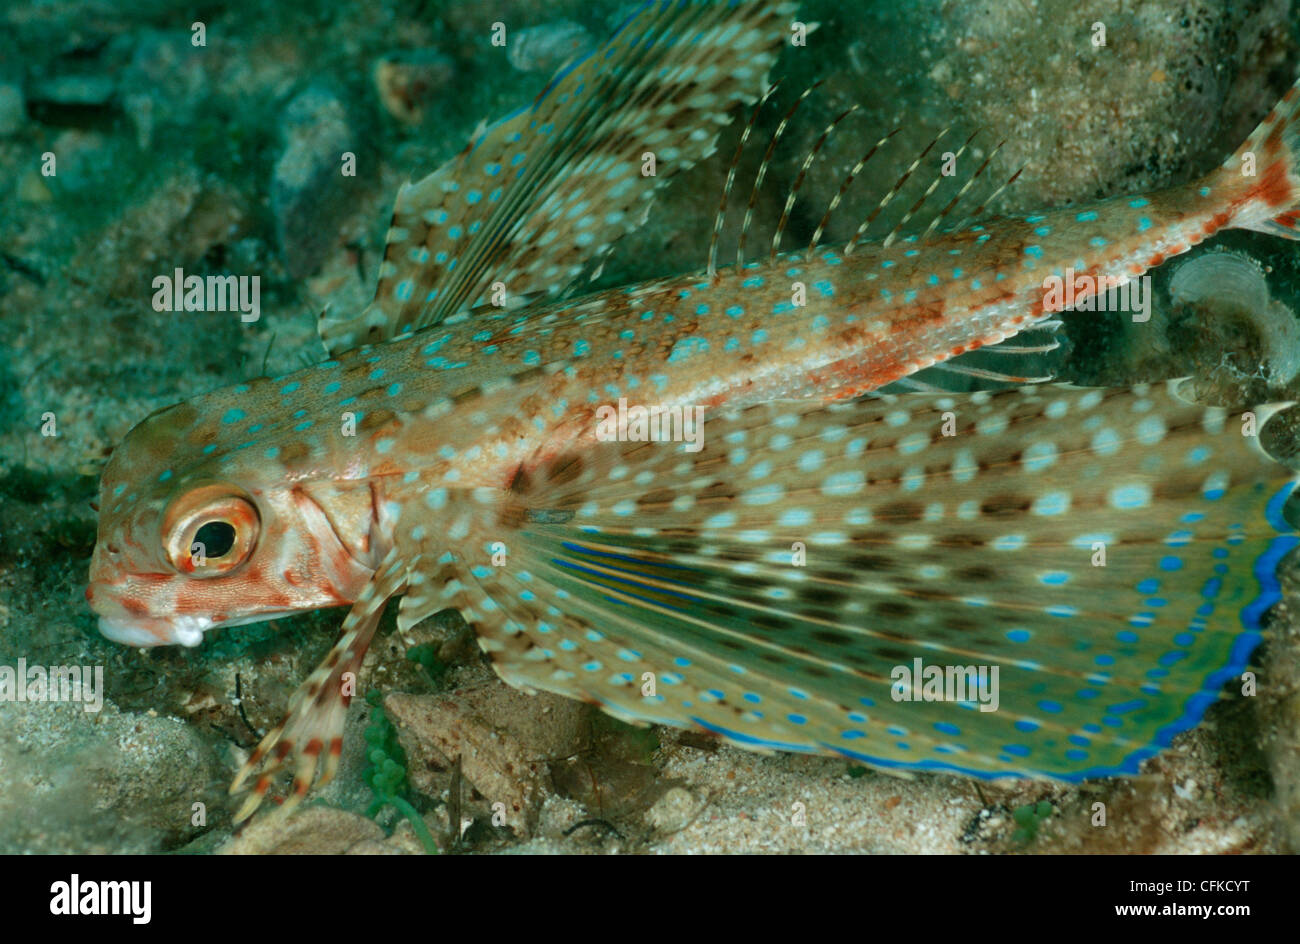 Flying gurnard fish, Dactylopterus volitans, photographed in the Mediterranean Sea. Stock Photo